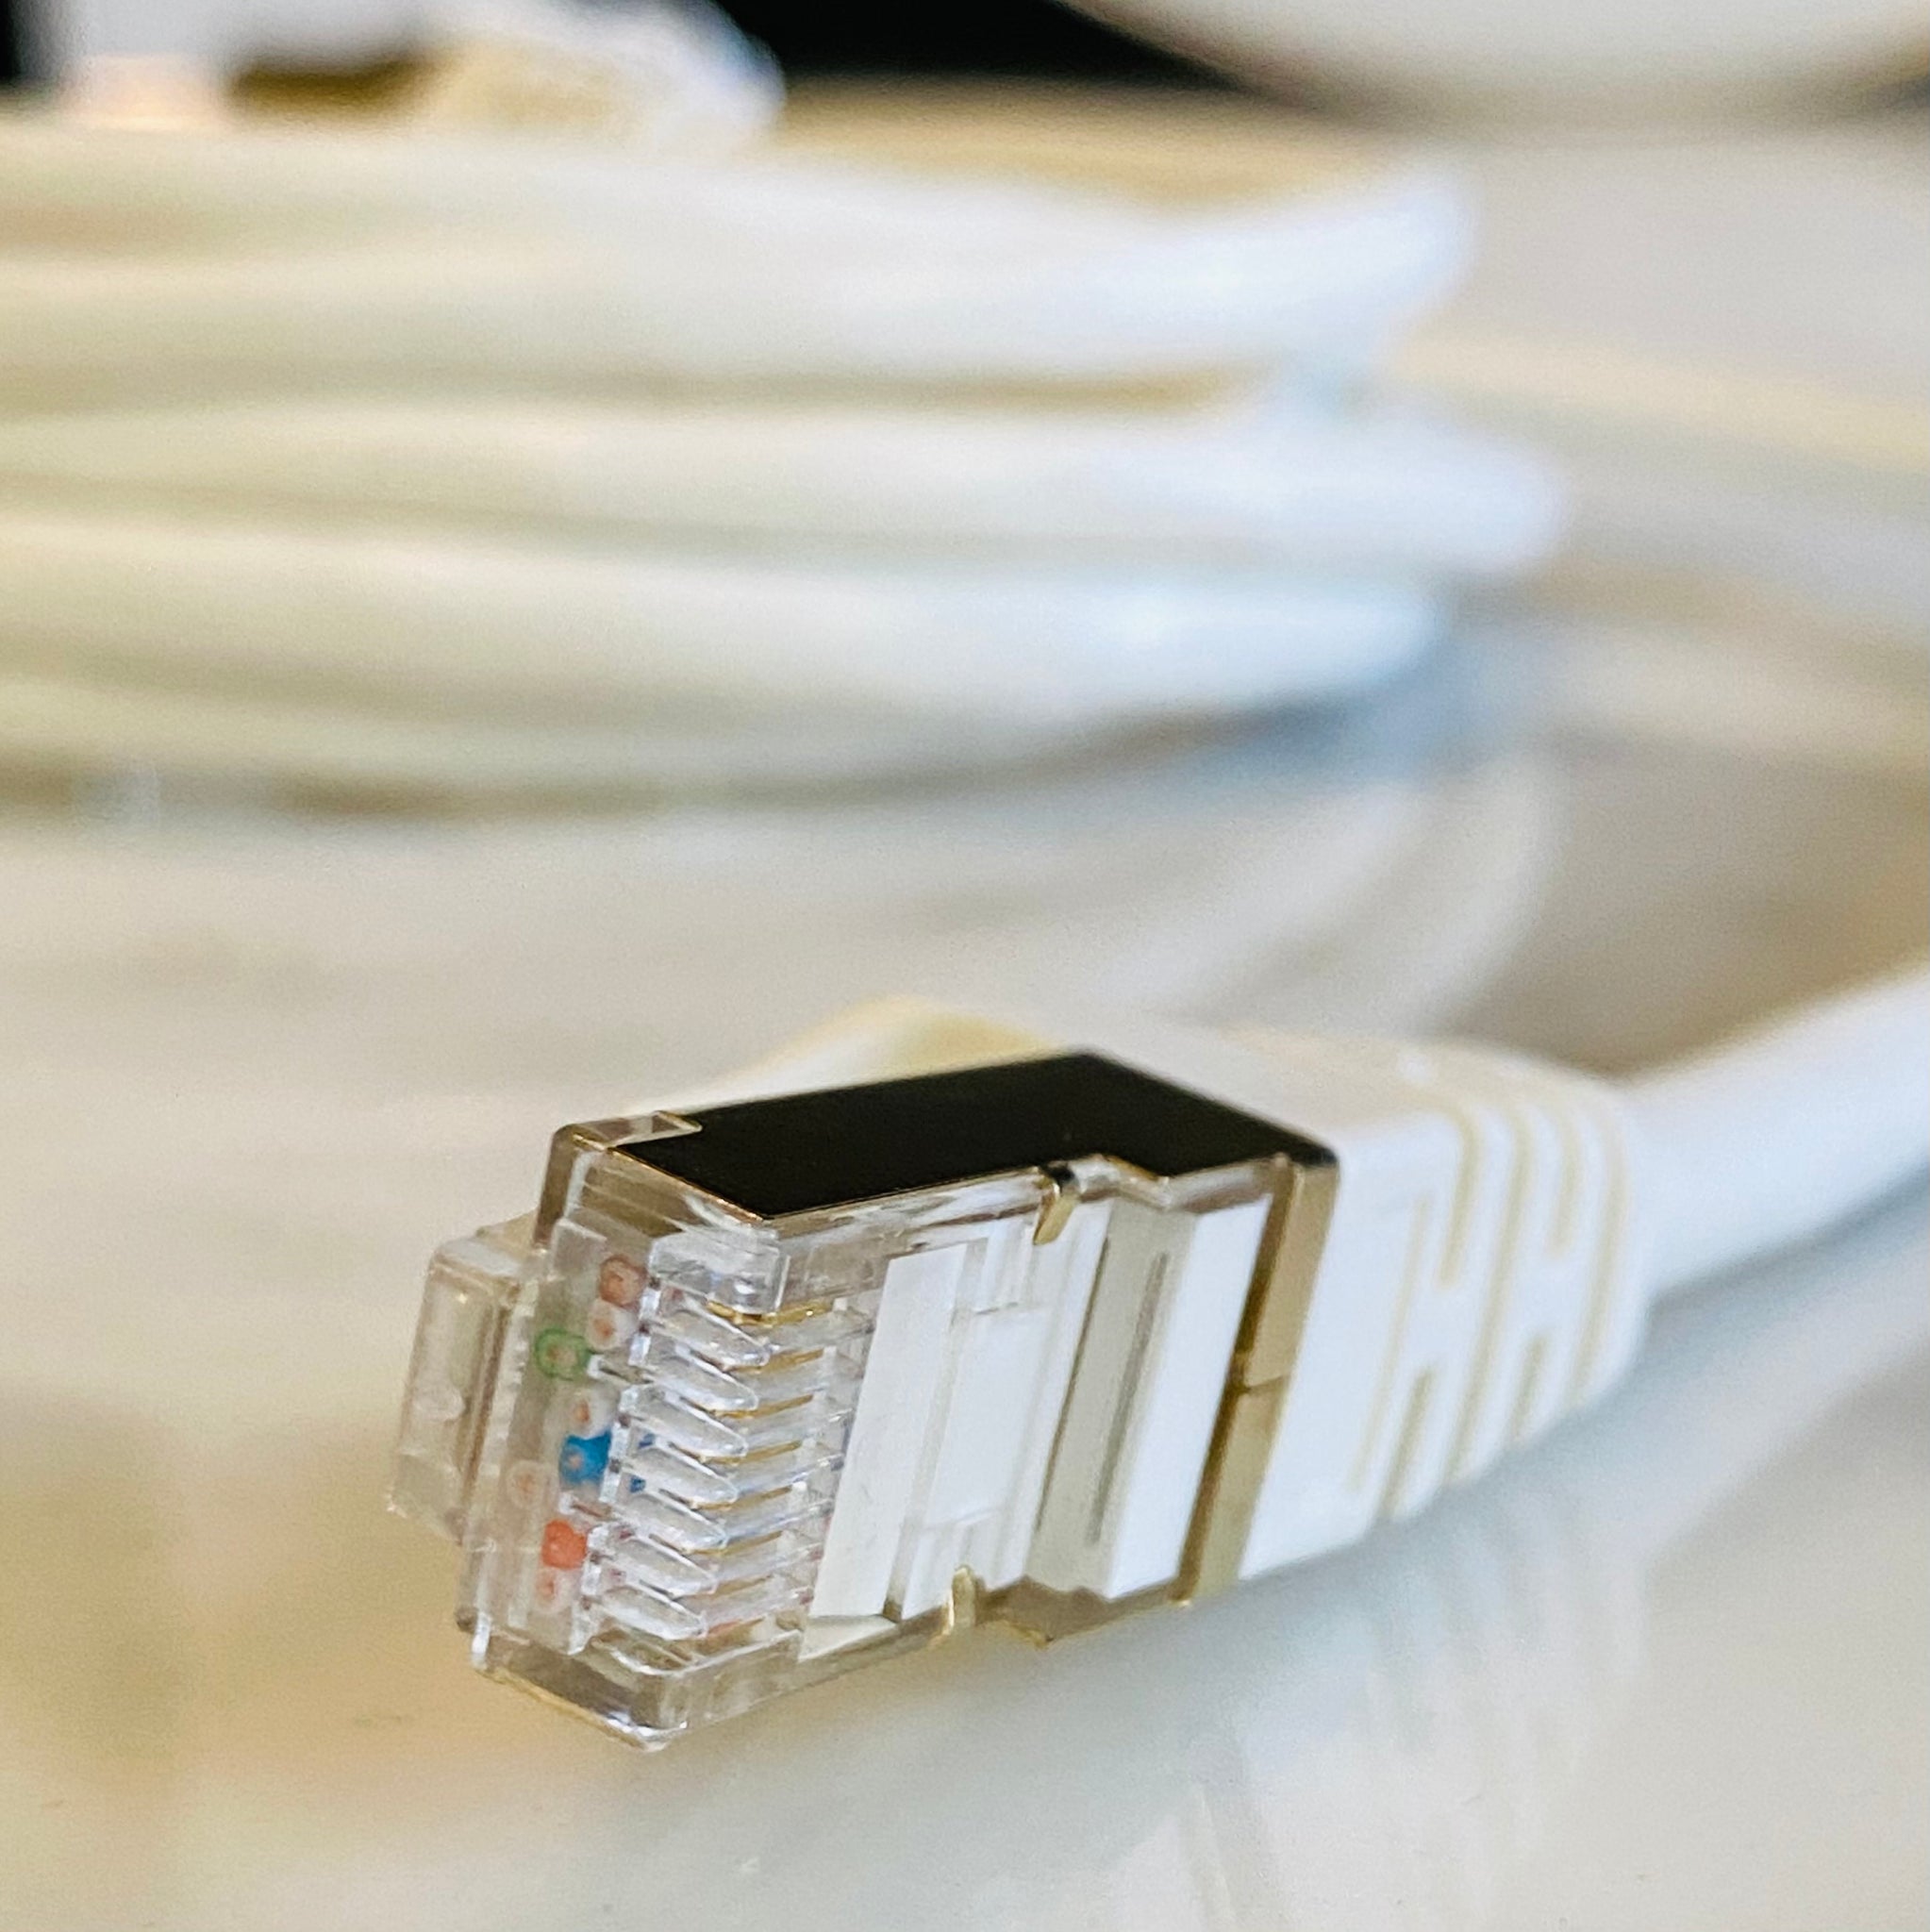 Get 8 Wire Ethernet Cable Background